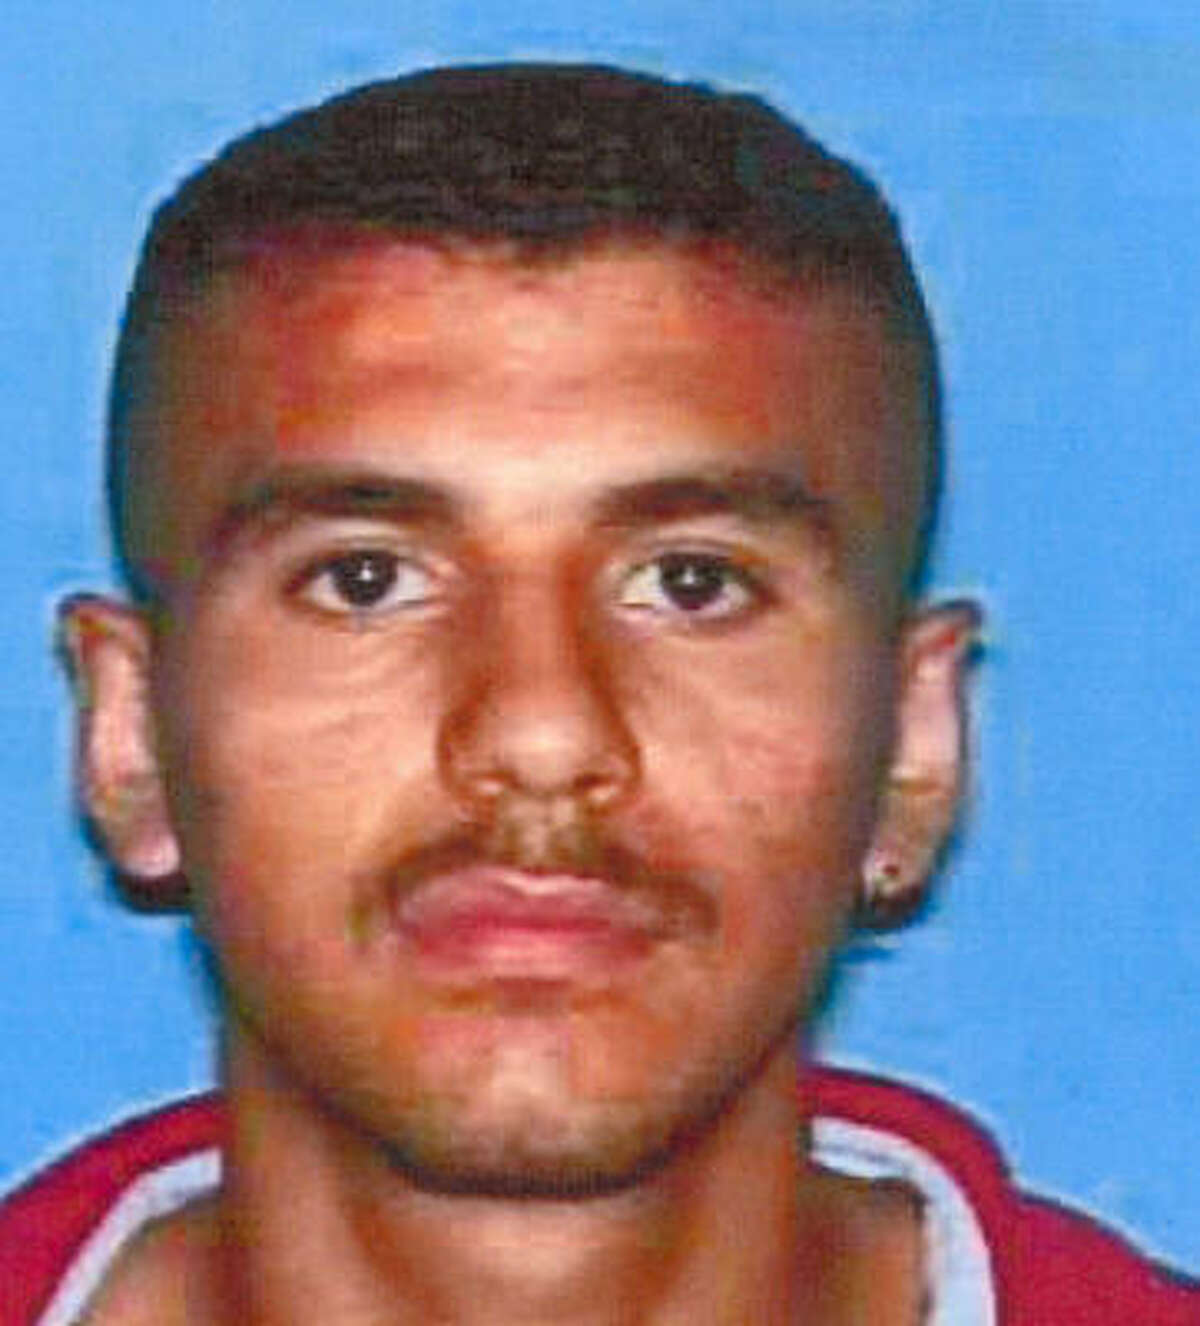 Sanchez's brother, Adolfo, was also charged in the killing.